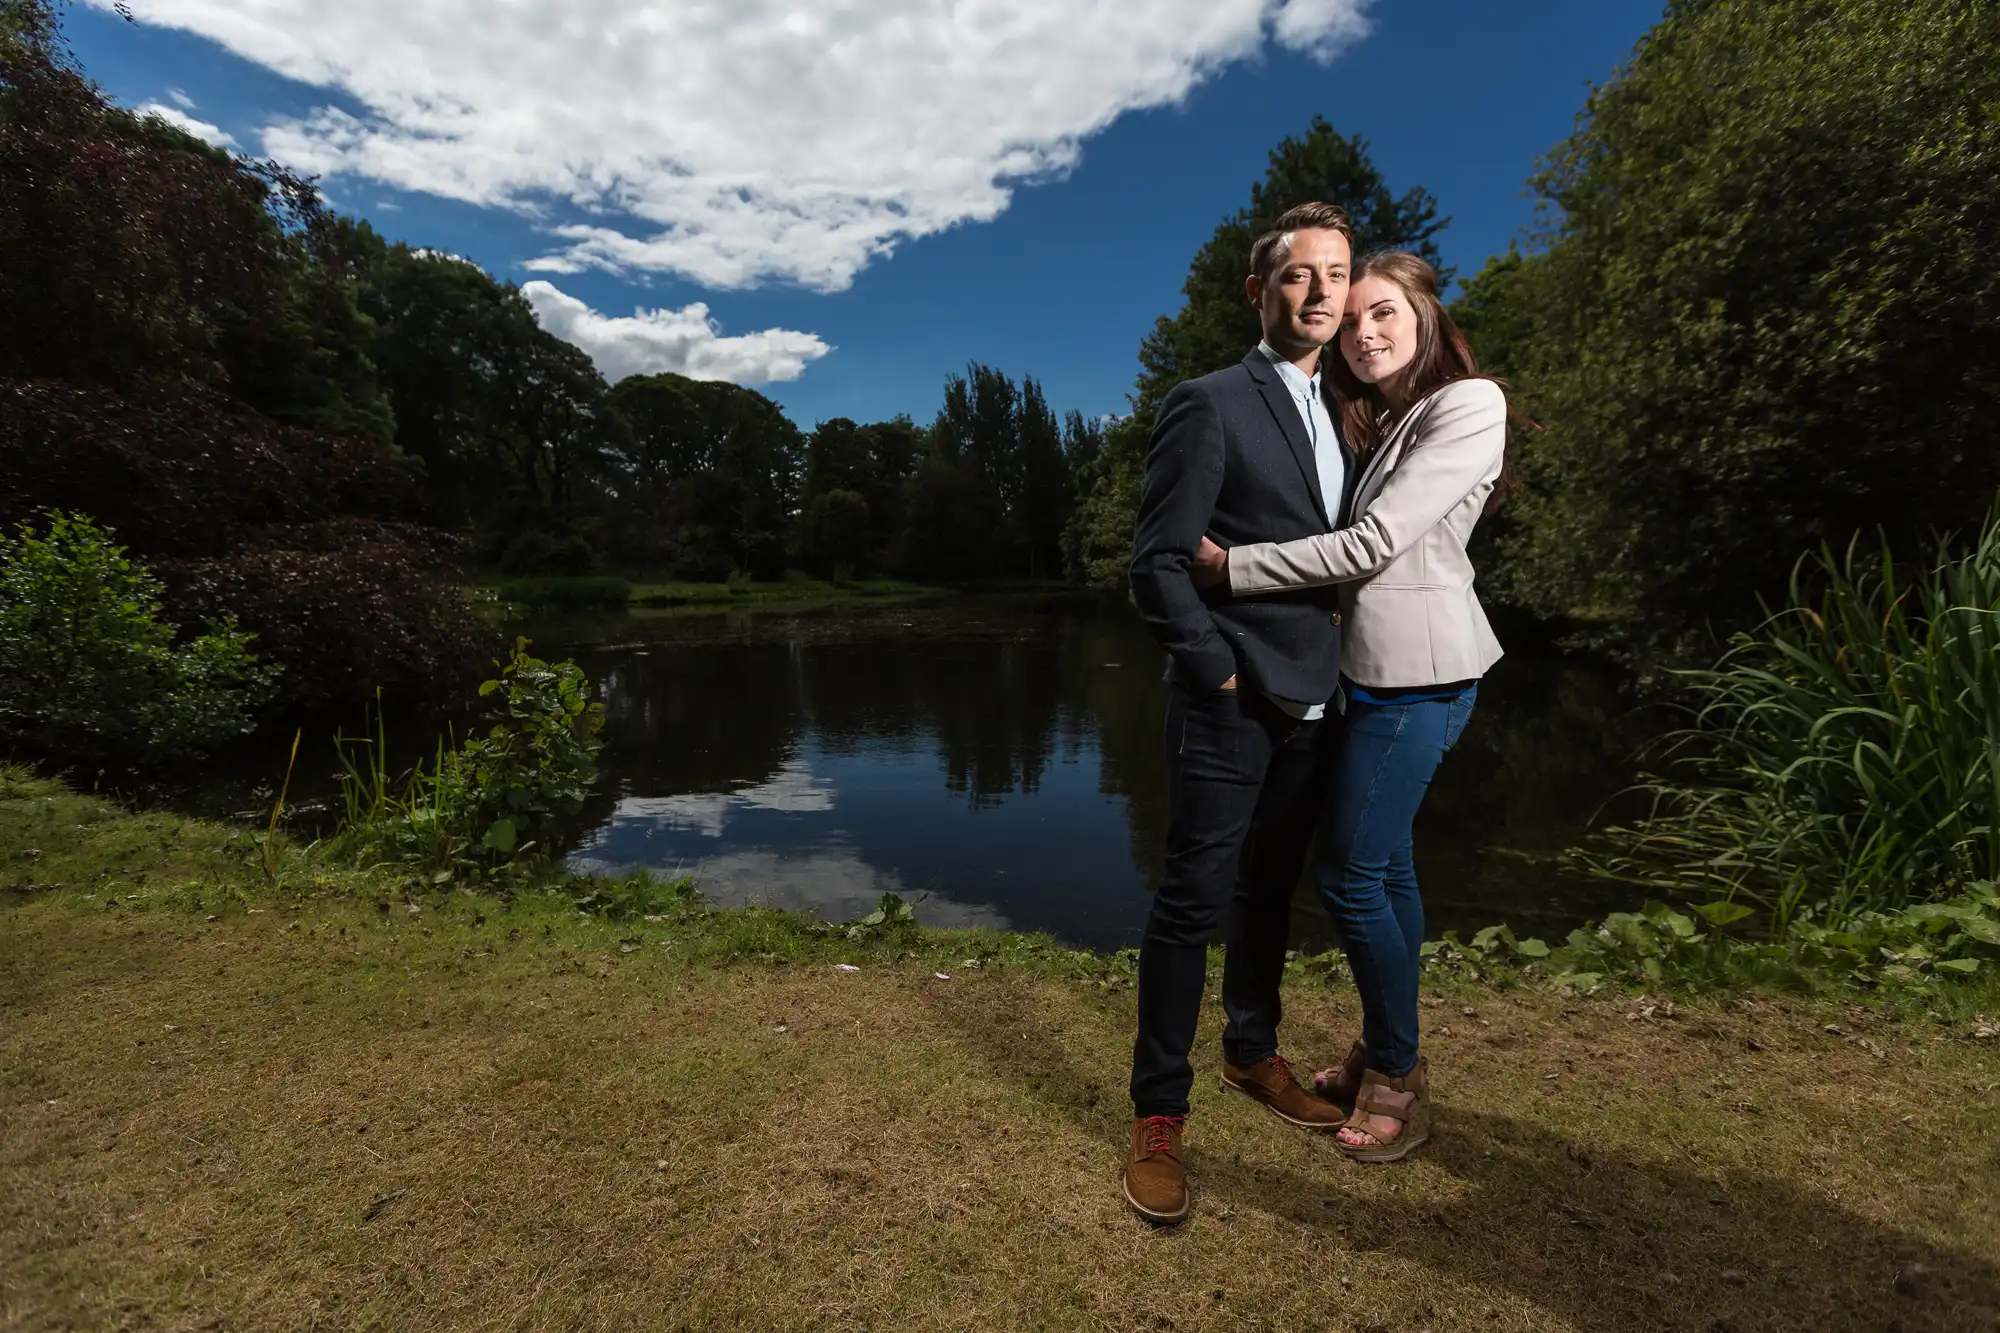 A couple embracing by a pond in a lush park, with clear blue skies and vibrant greenery surrounding them.